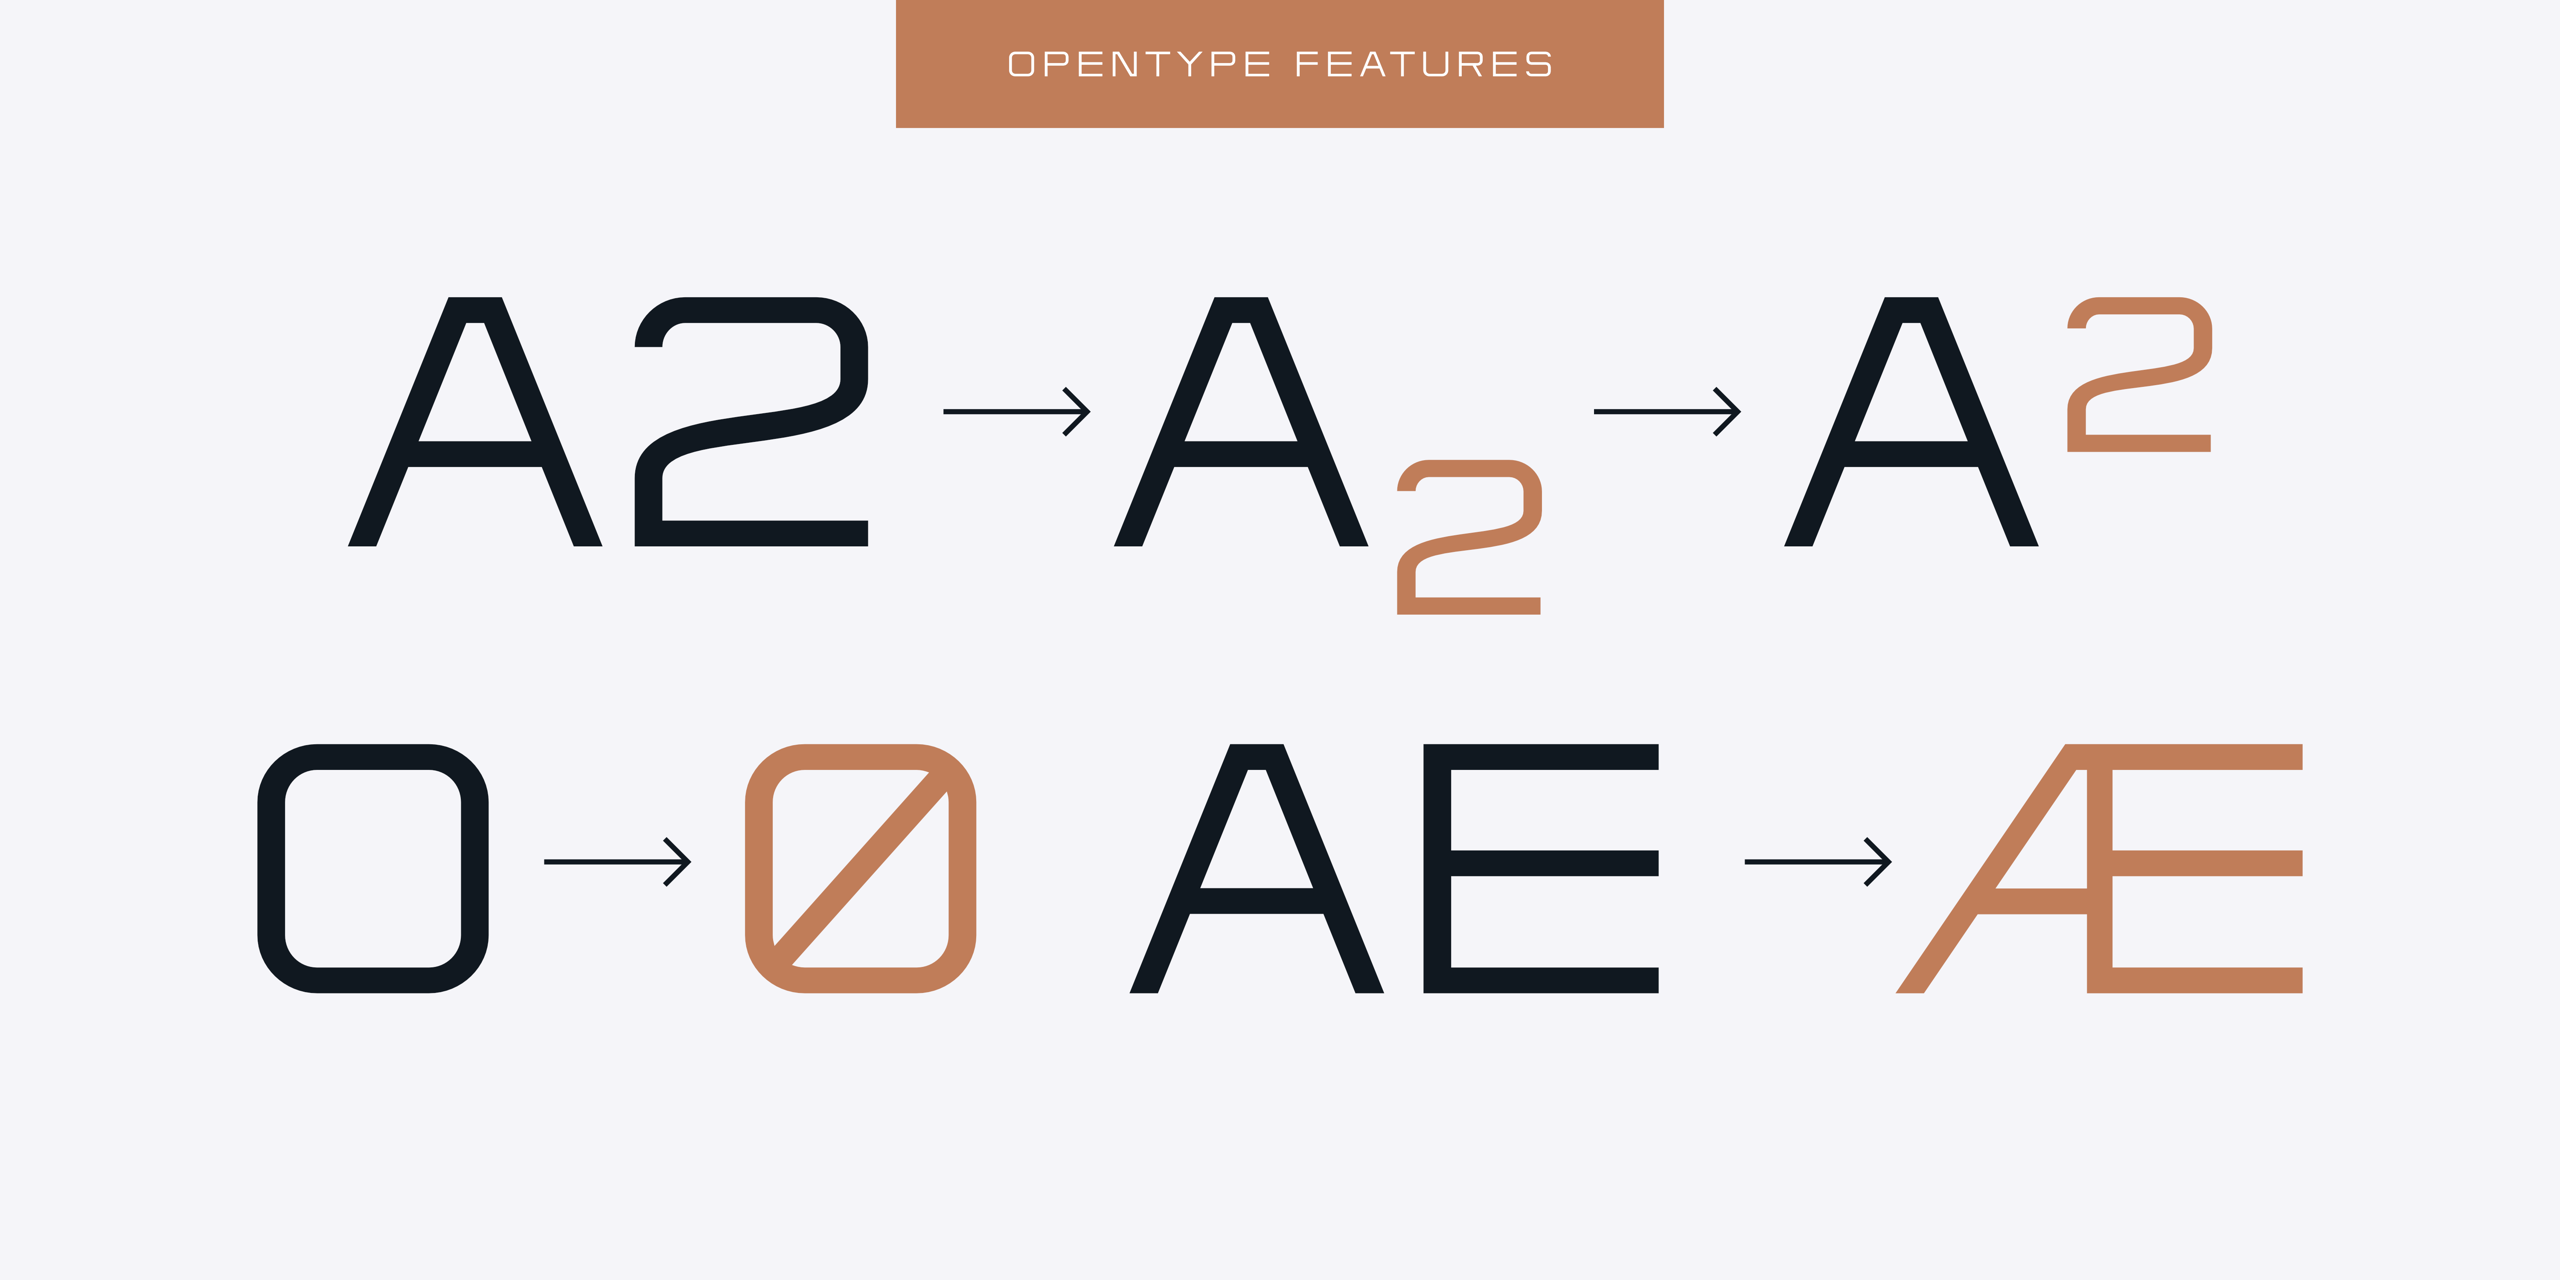 OpenType features of the typeface